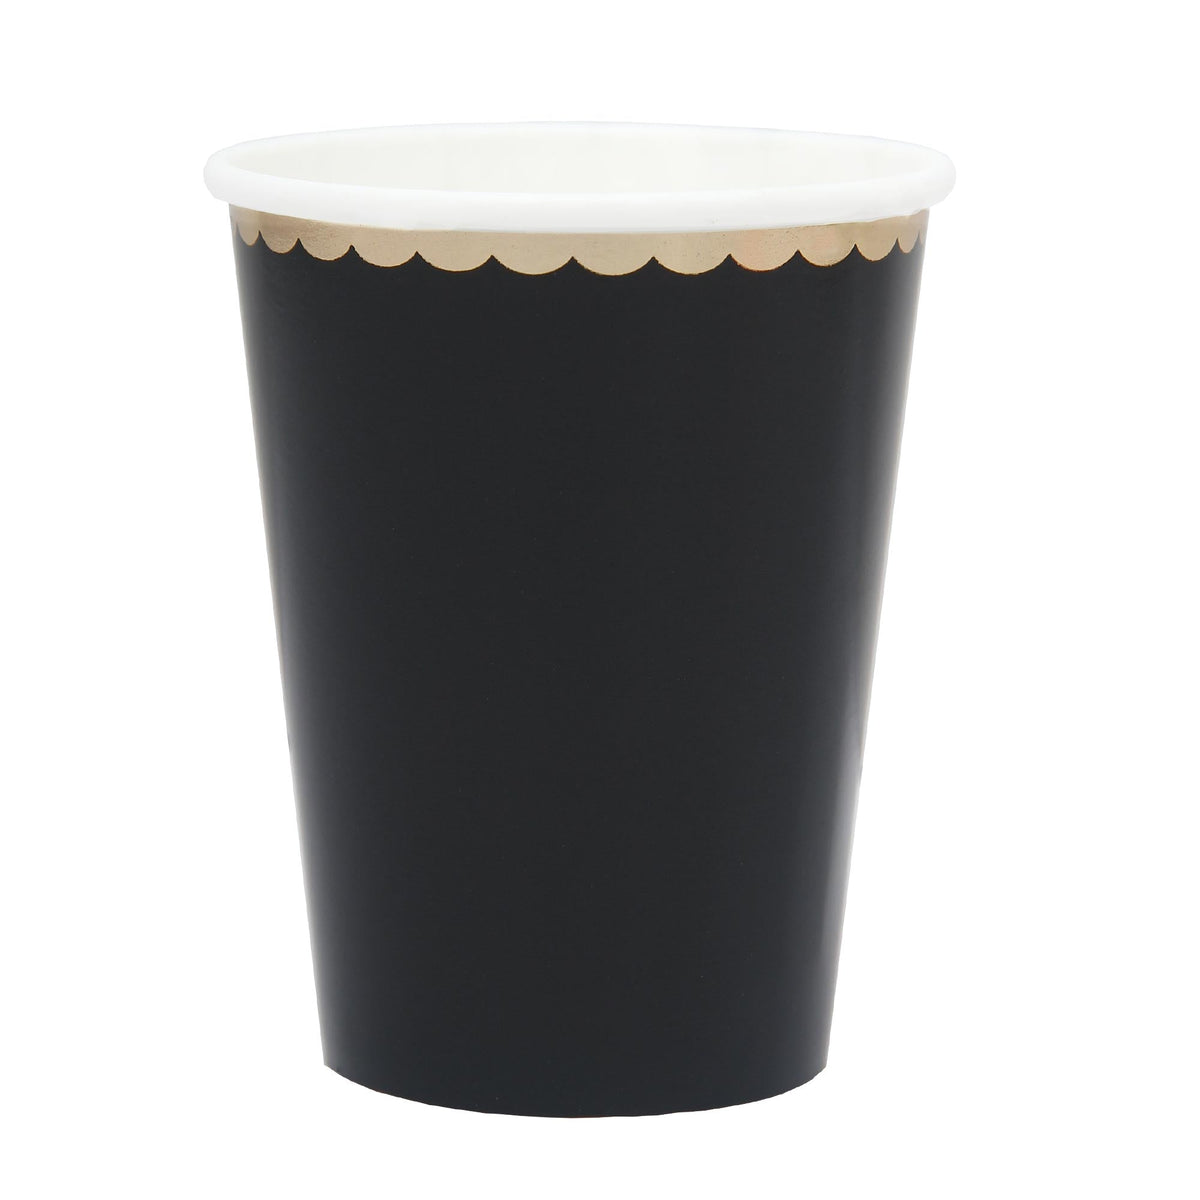 YIWU SANDY PAPER PRODUCTS CO., LTD Everyday Entertaining Black Paper Cups, 9 oz, 8 Count